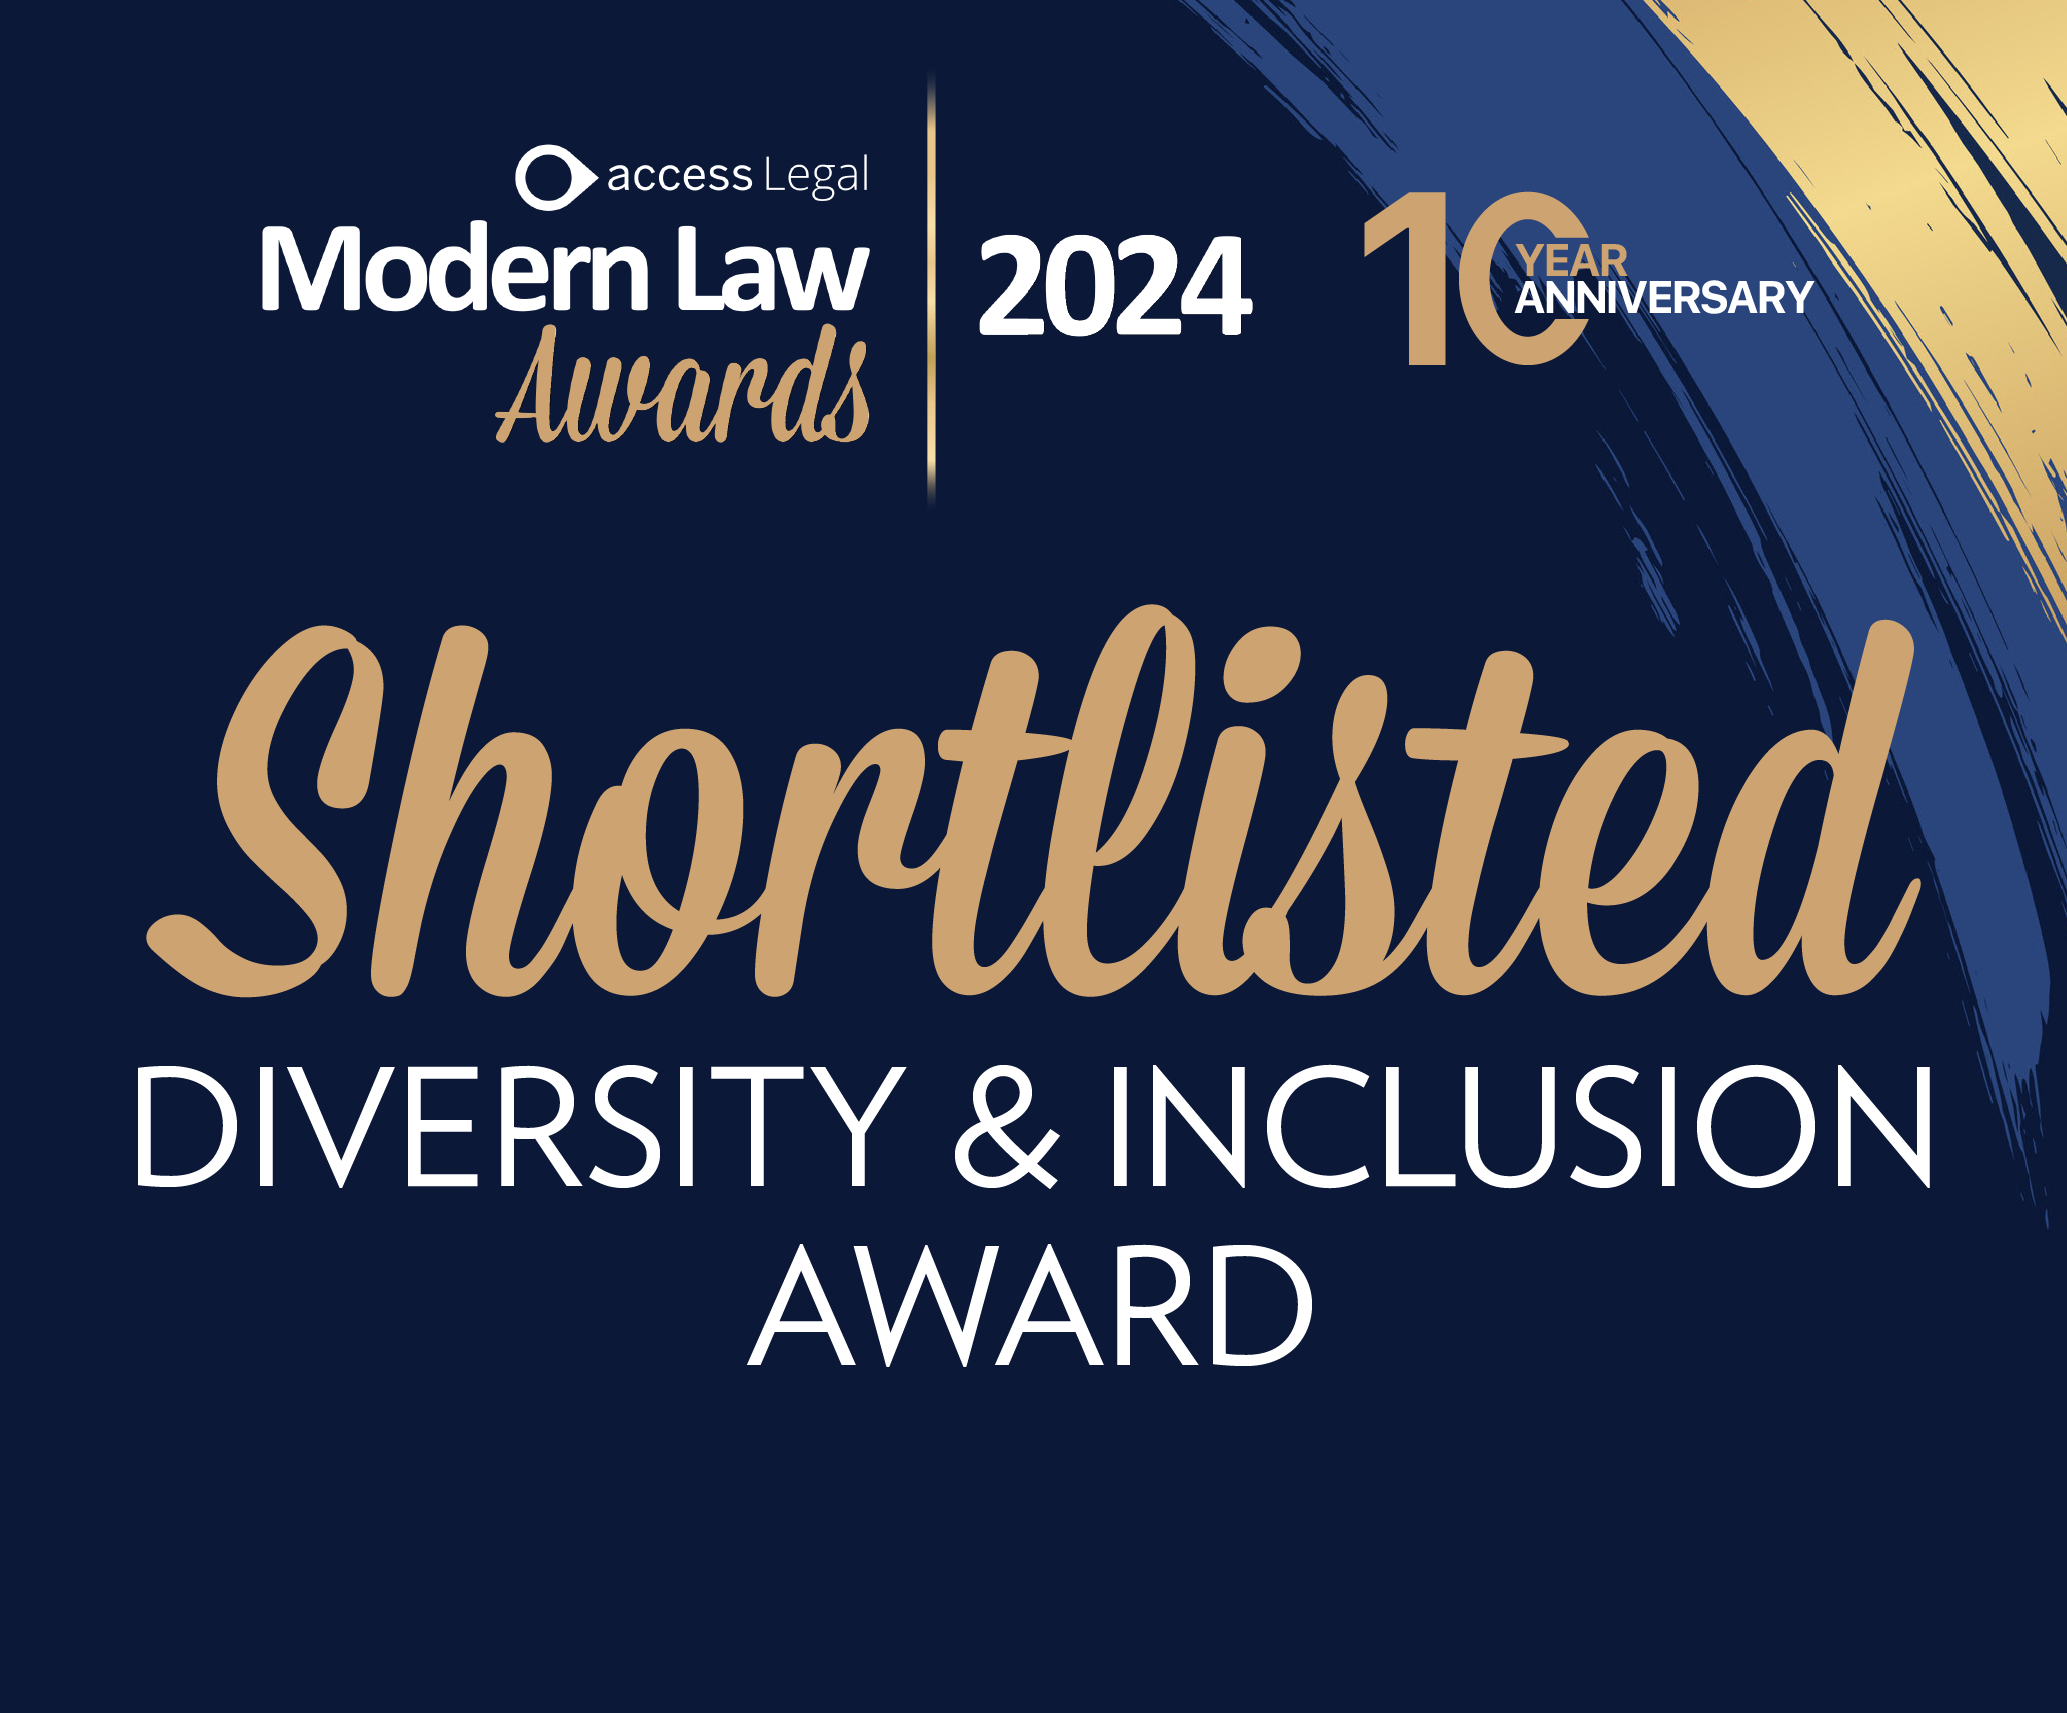 Parklane Plowden shortlisted for the Diversity and Inclusion Award at the Modern Law Awards